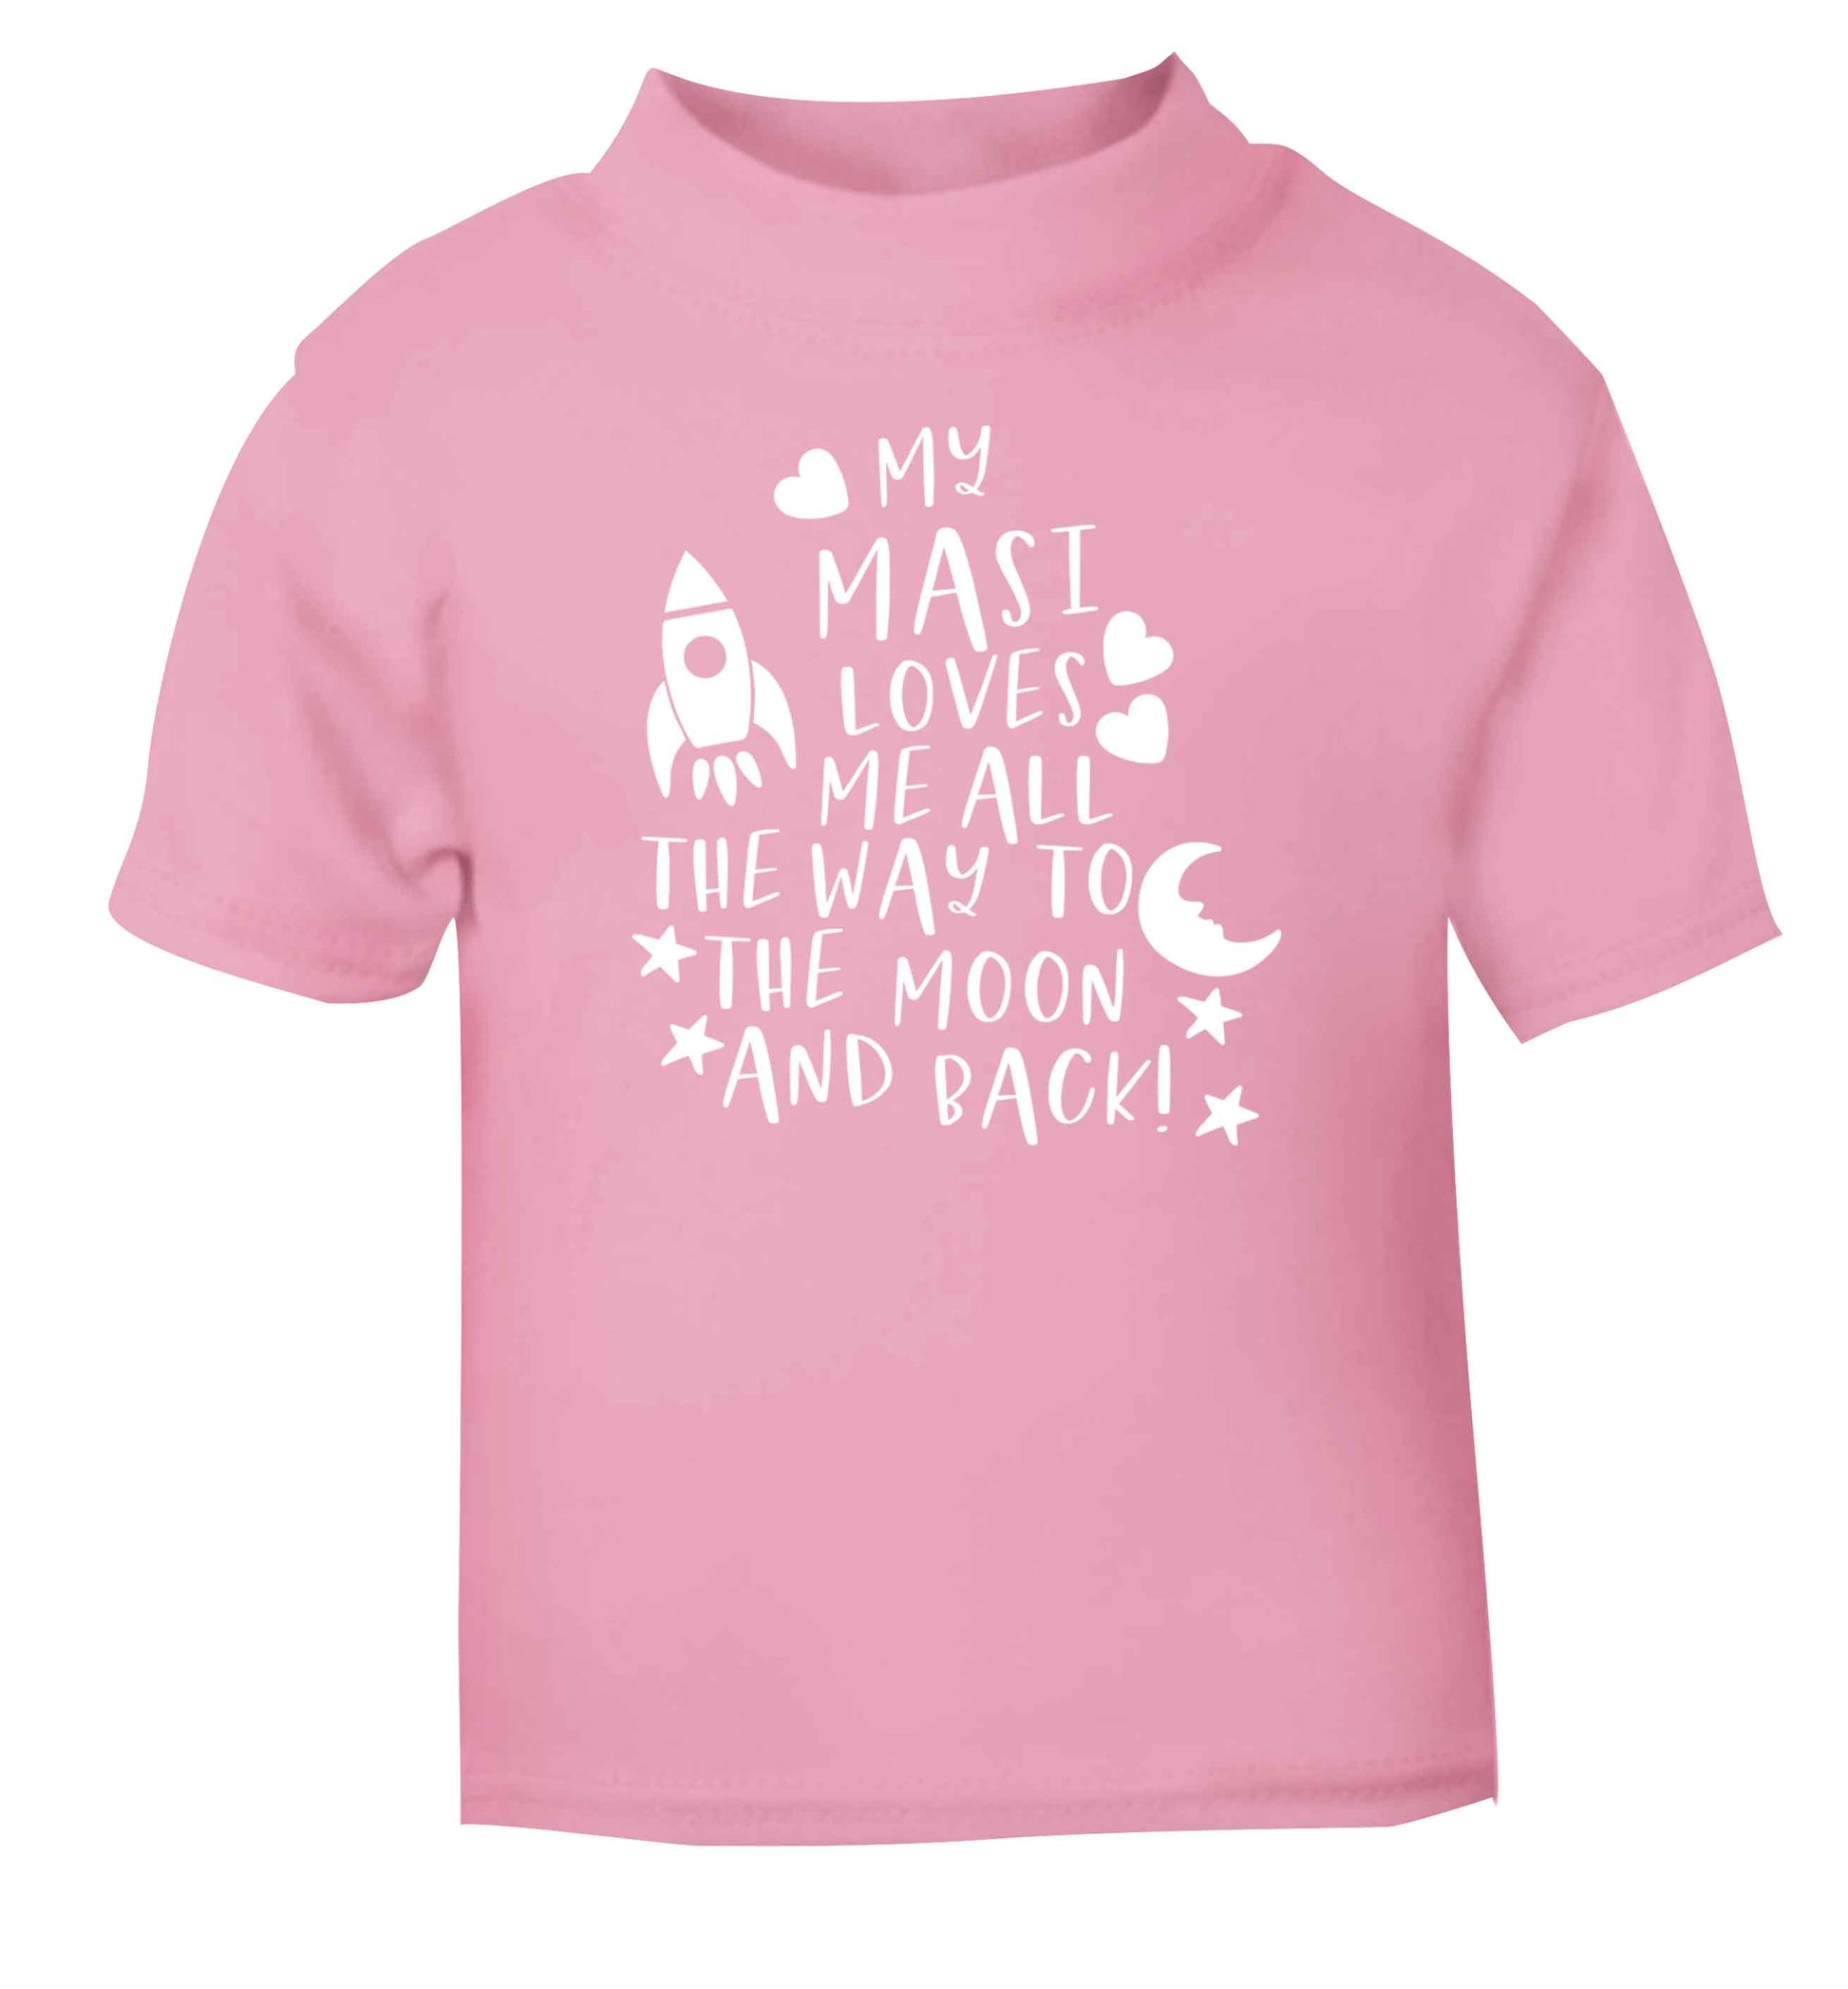 My masi loves me all the way to the moon and back light pink Baby Toddler Tshirt 2 Years